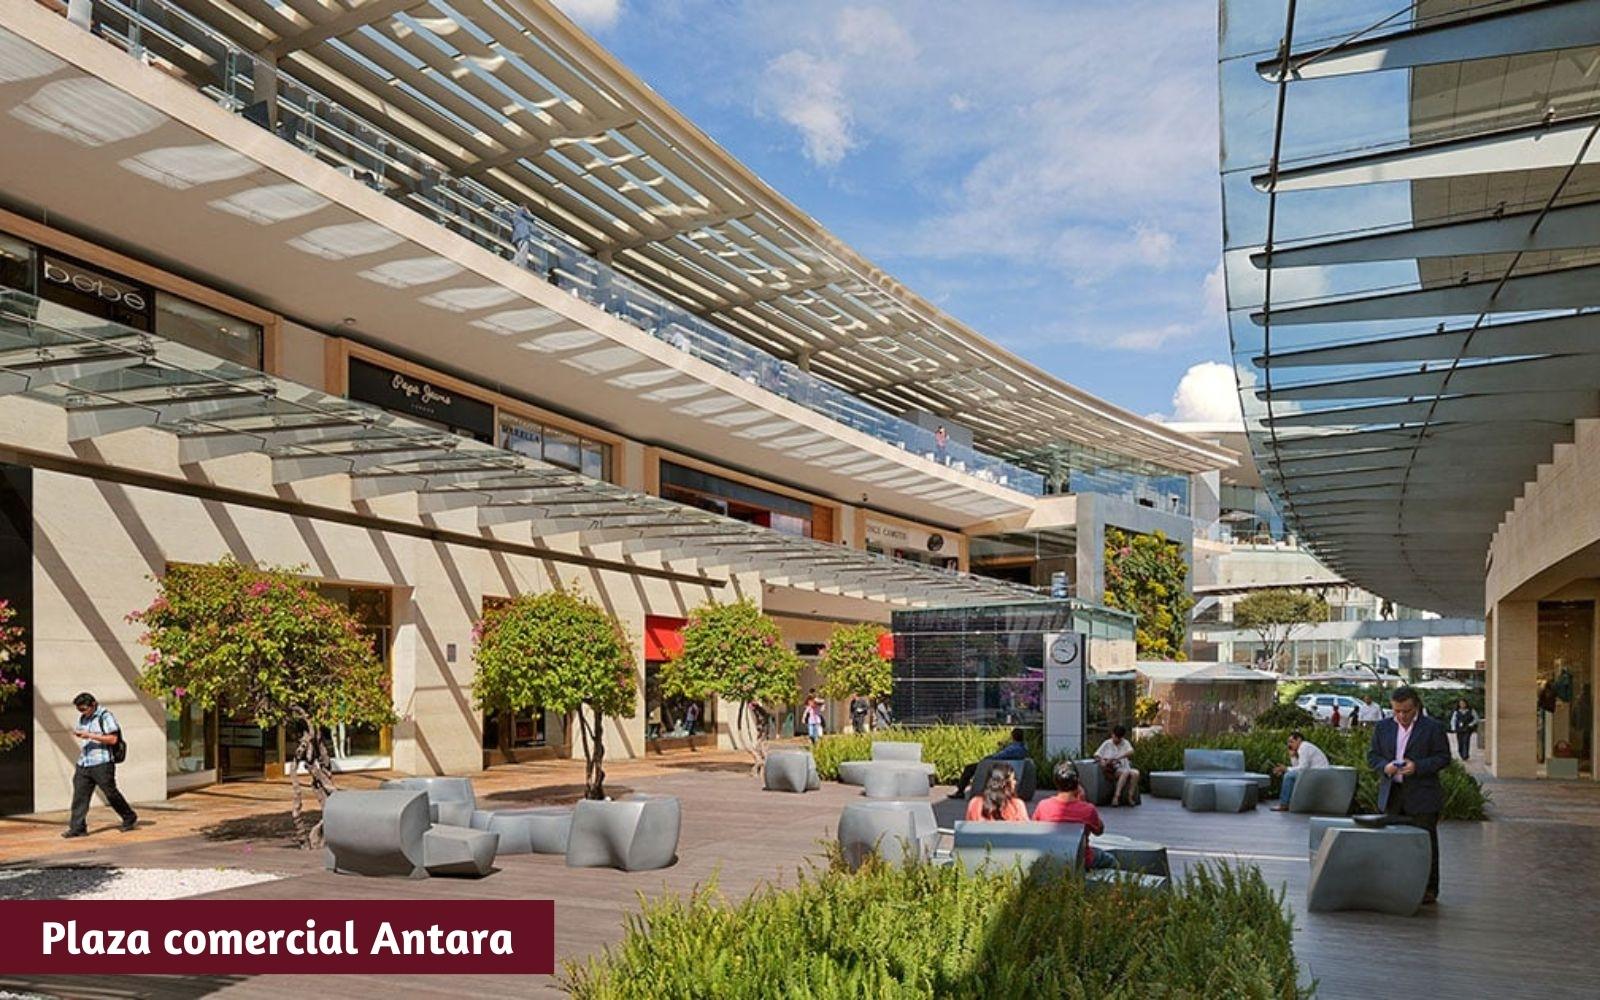 Luxury condominium with 30 amenities, 13,000 m2 of green areas, designed by renown architect firm, Fuentes del Pedregal, for sale Mexico